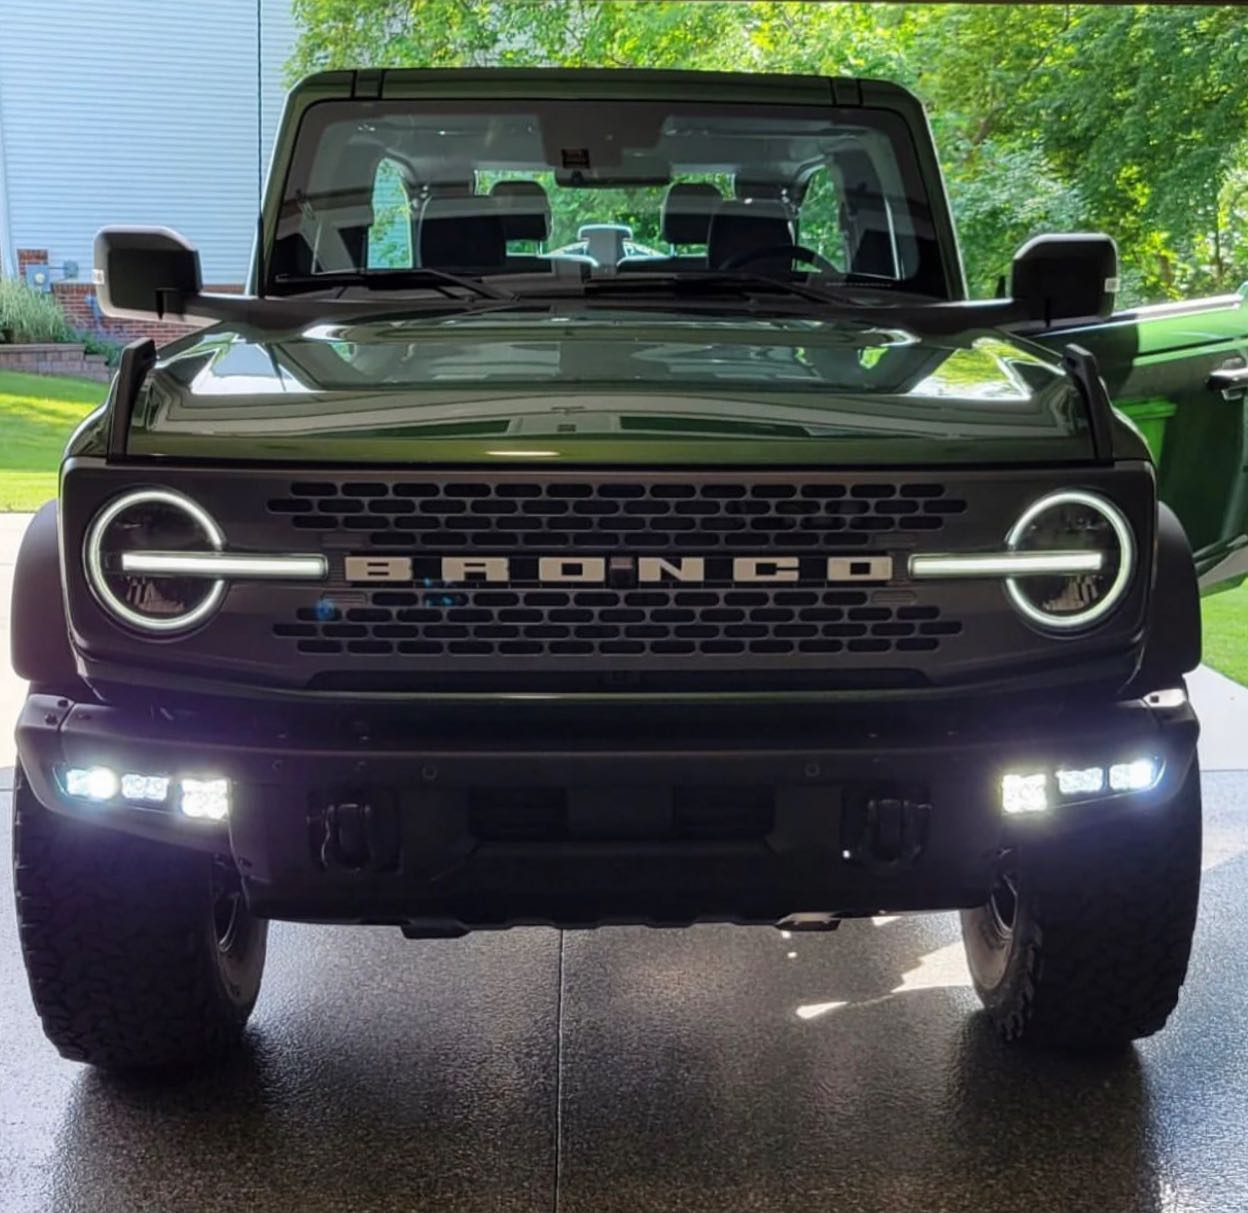 Ford Bronco TRIPLE FOG KITS | New Flush Mount Kit Now Available at 4x4TruckLEDs.com 1655436132775